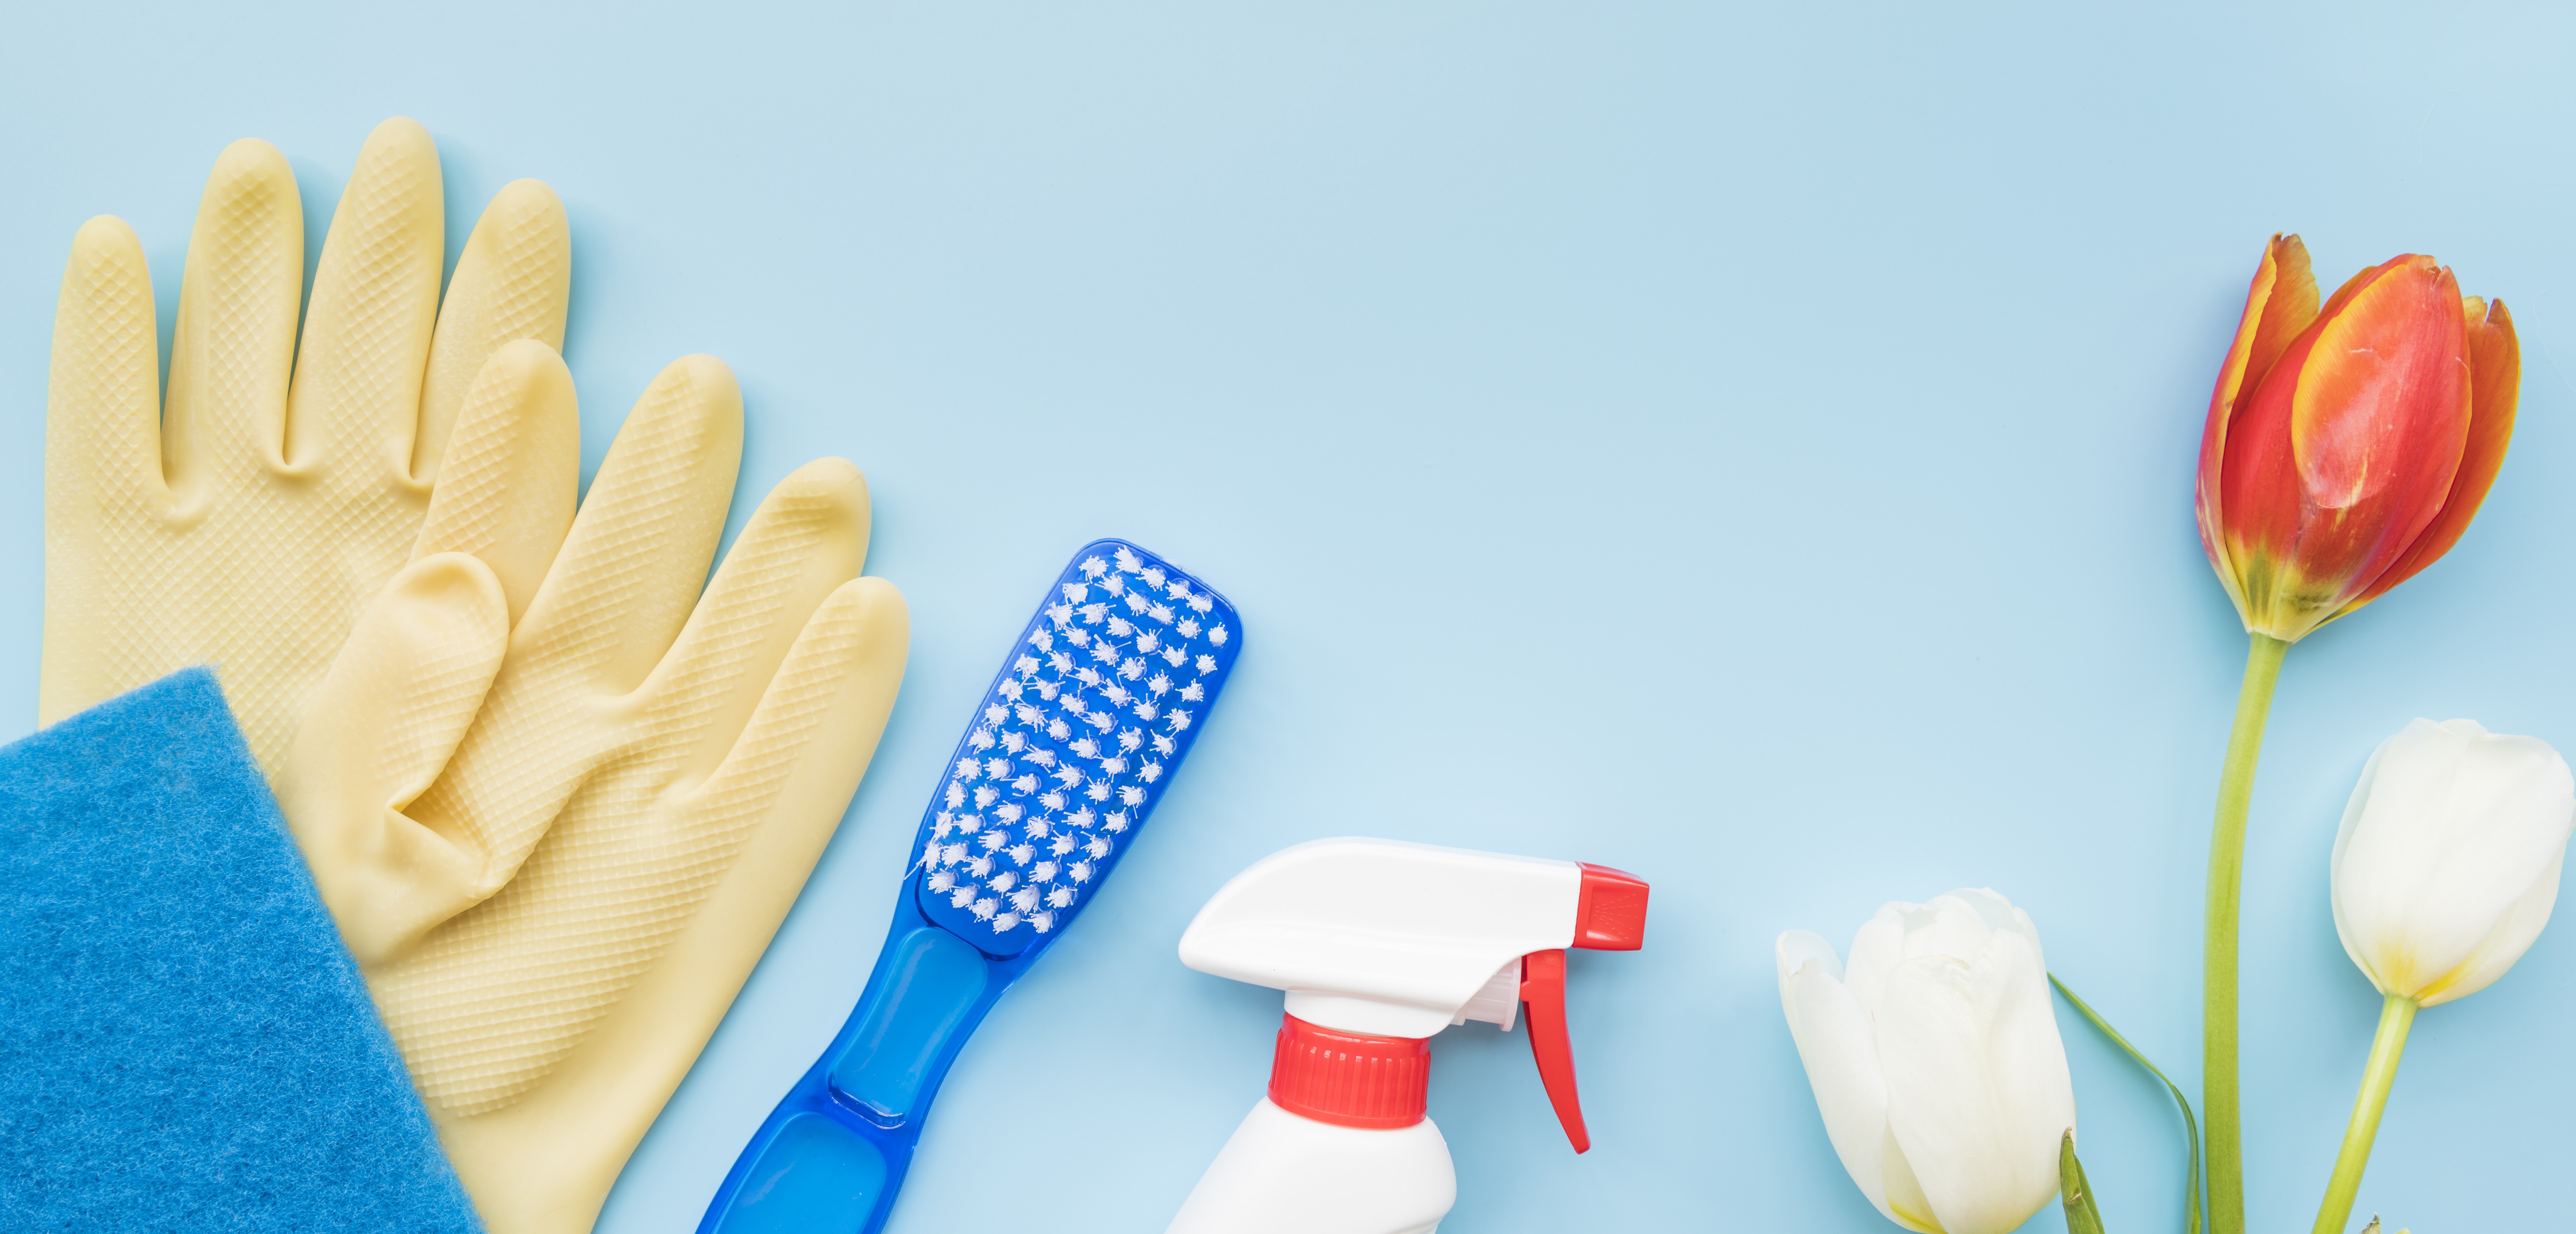 cleaning products on a light blue background